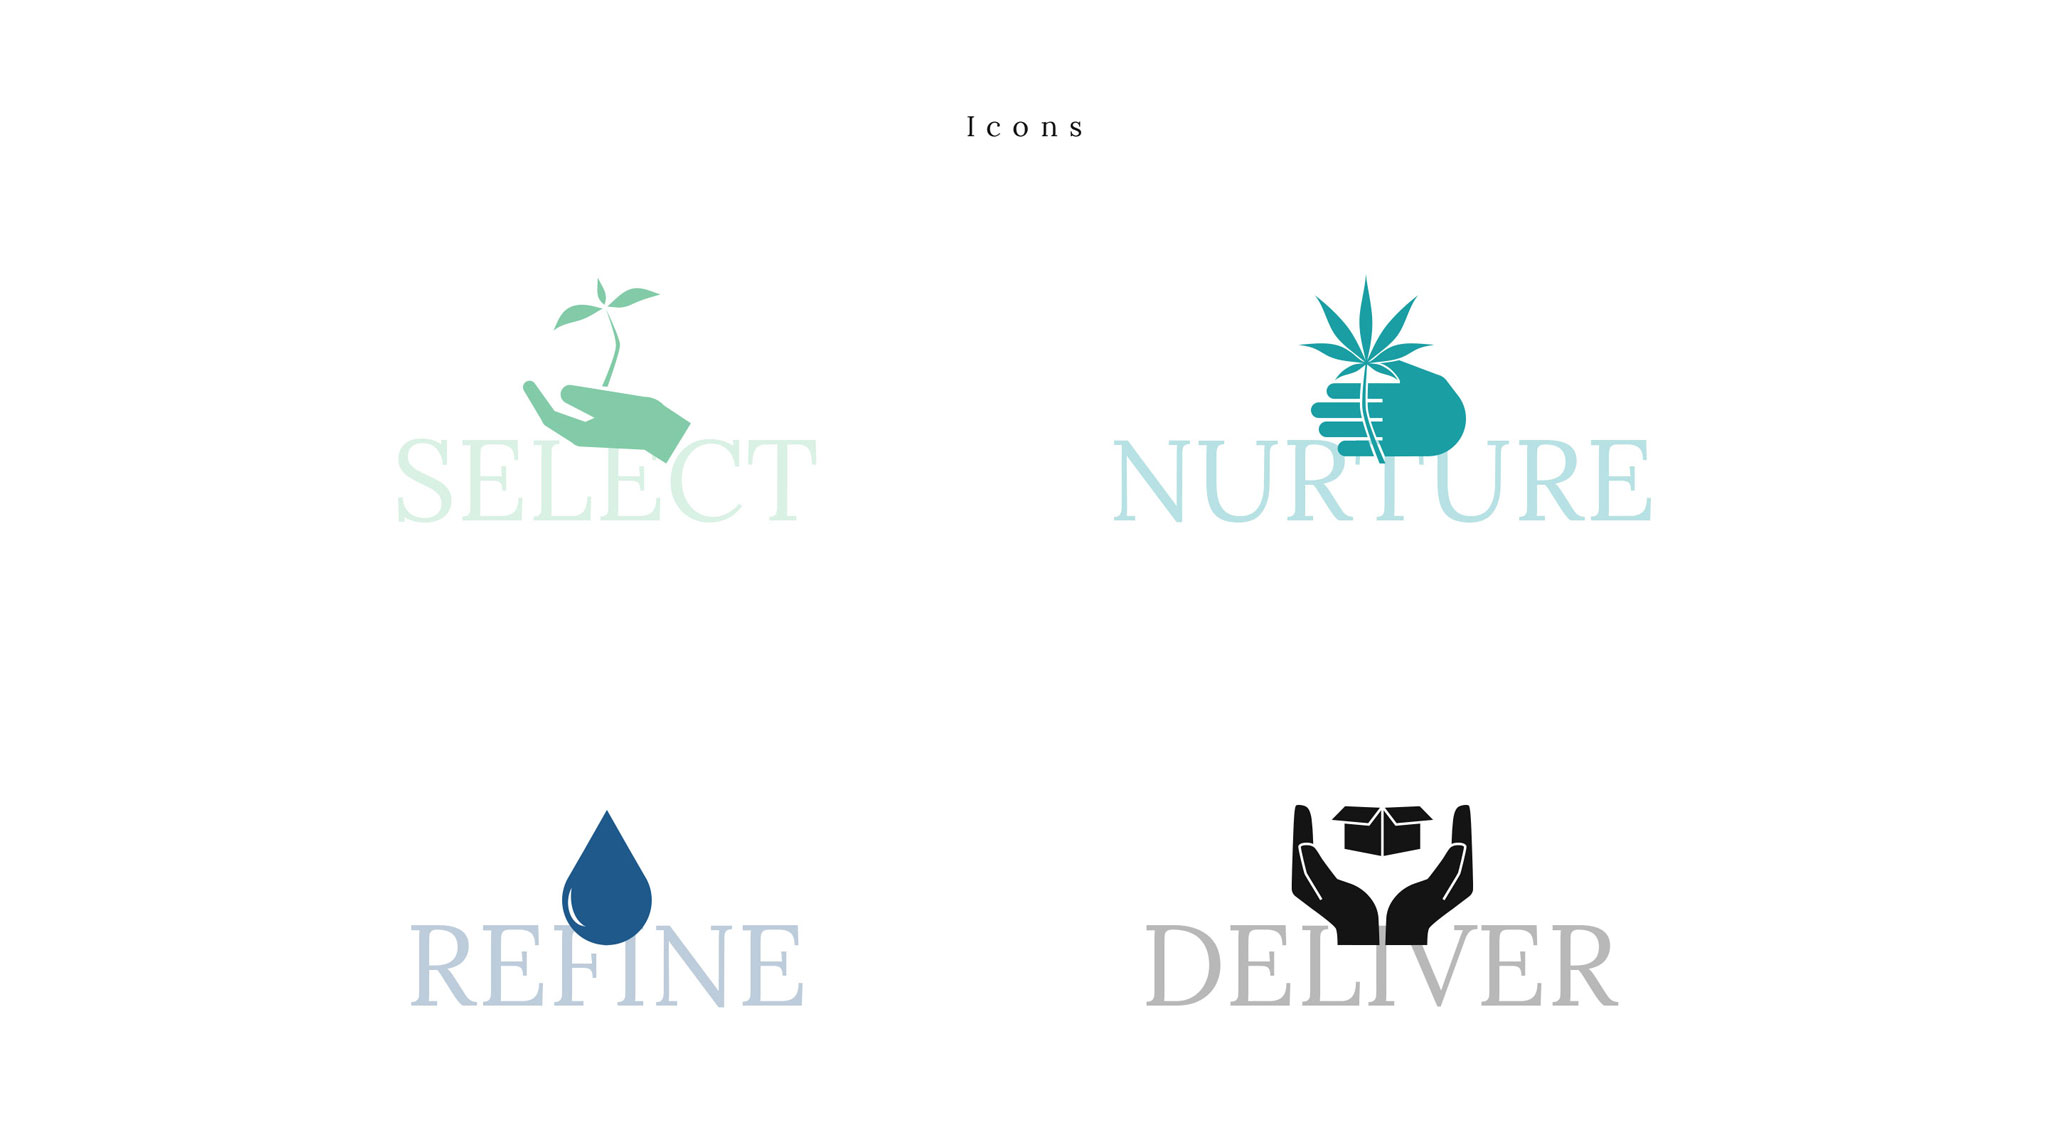 Four custom icons for 7 Point Law's marketing message